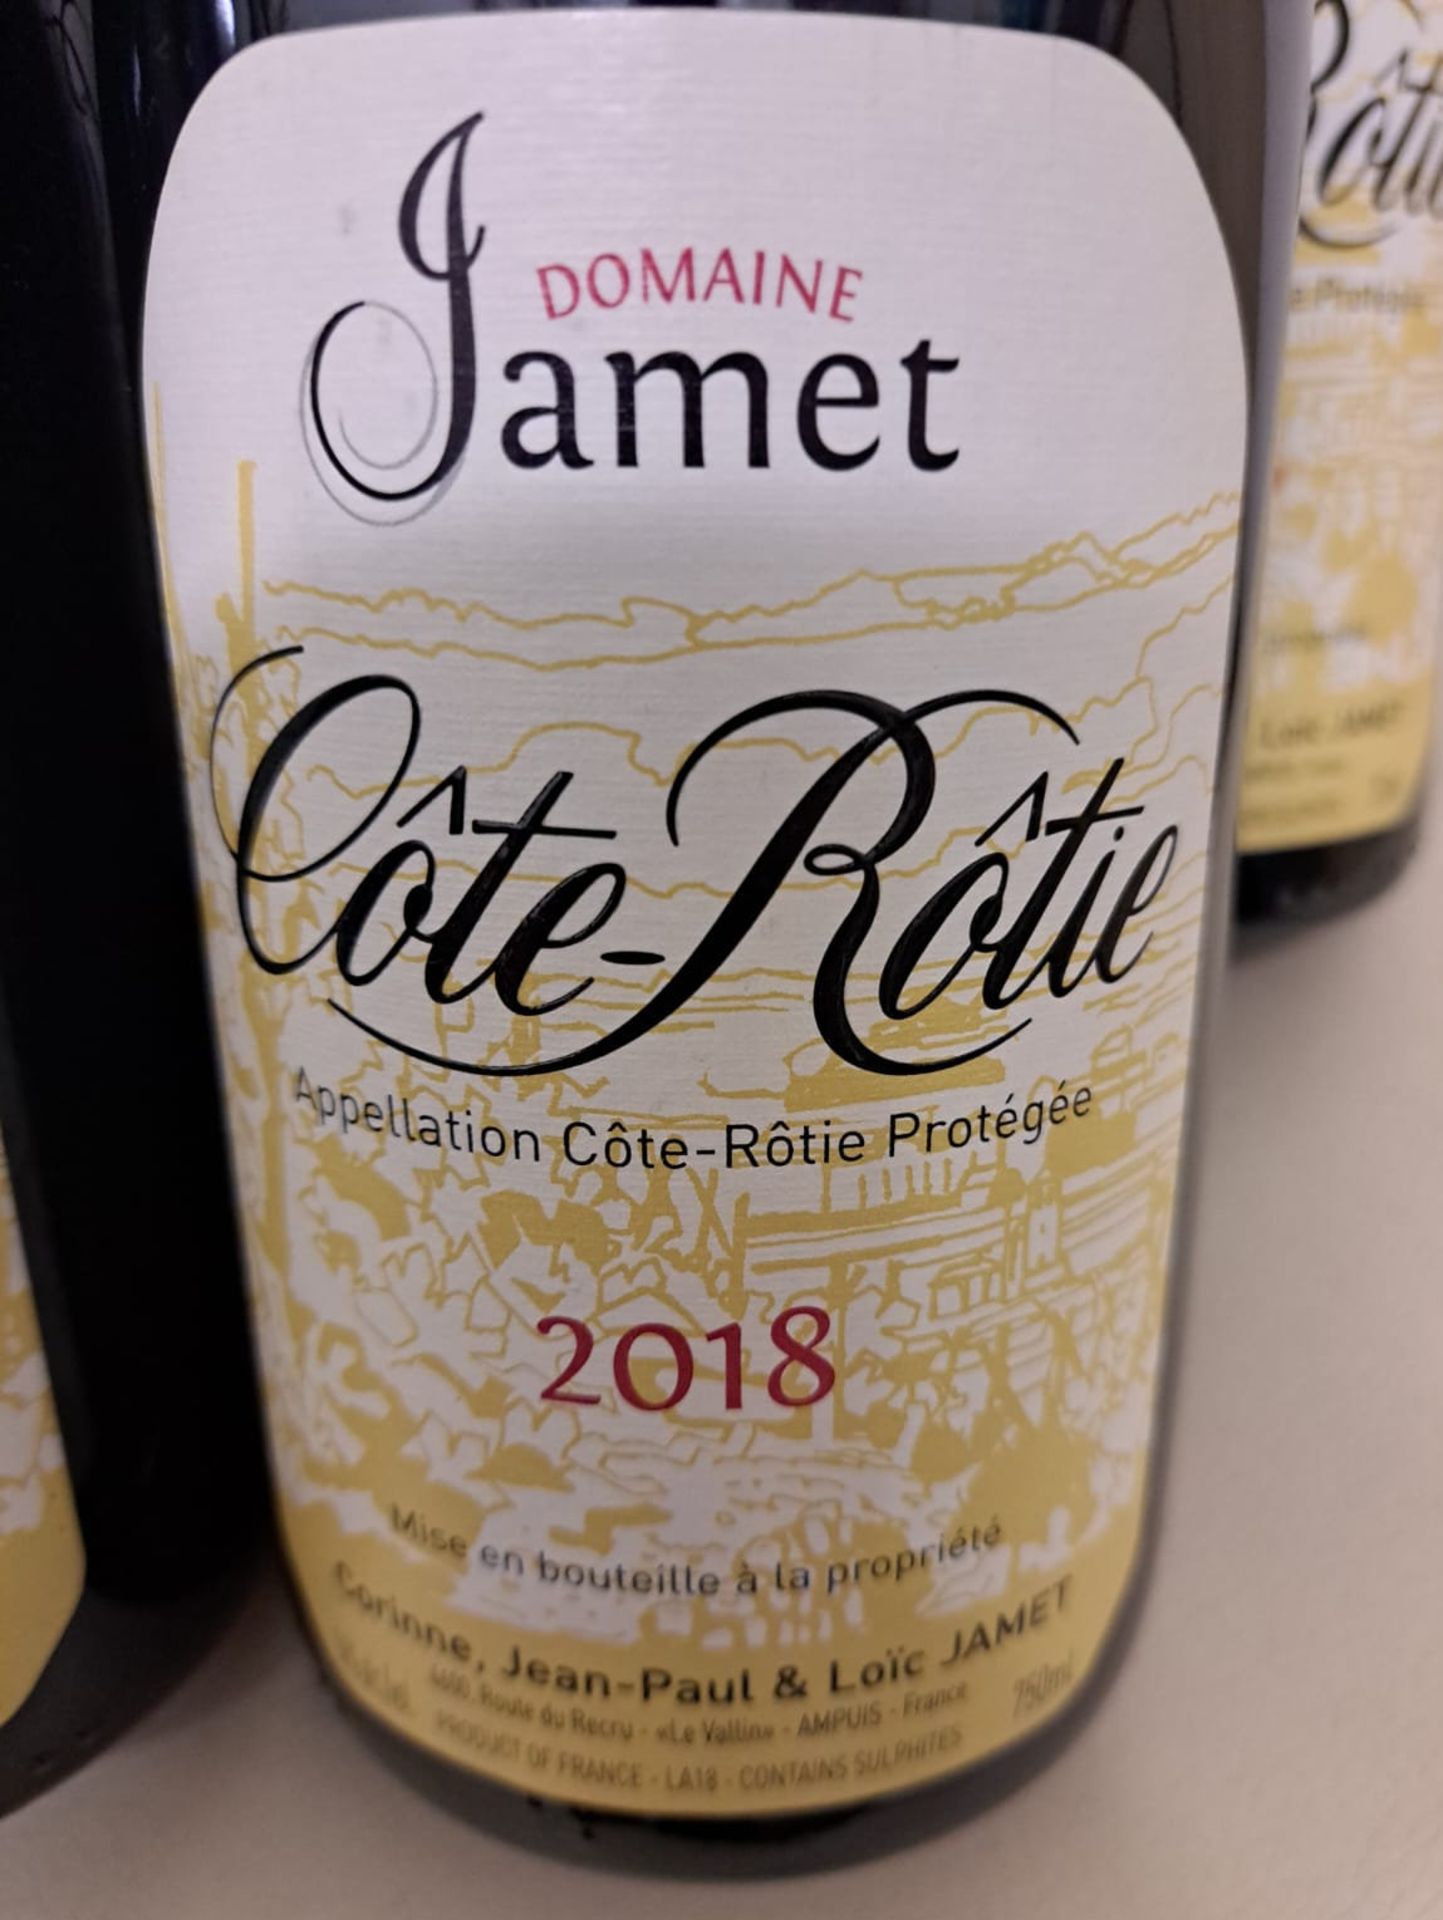 3 x Bottles of 2018 Domaine Jamet Cote-Rotie Red Wine - Retail Price £450 - Ref: WAS079A - CL866 - - Image 2 of 2